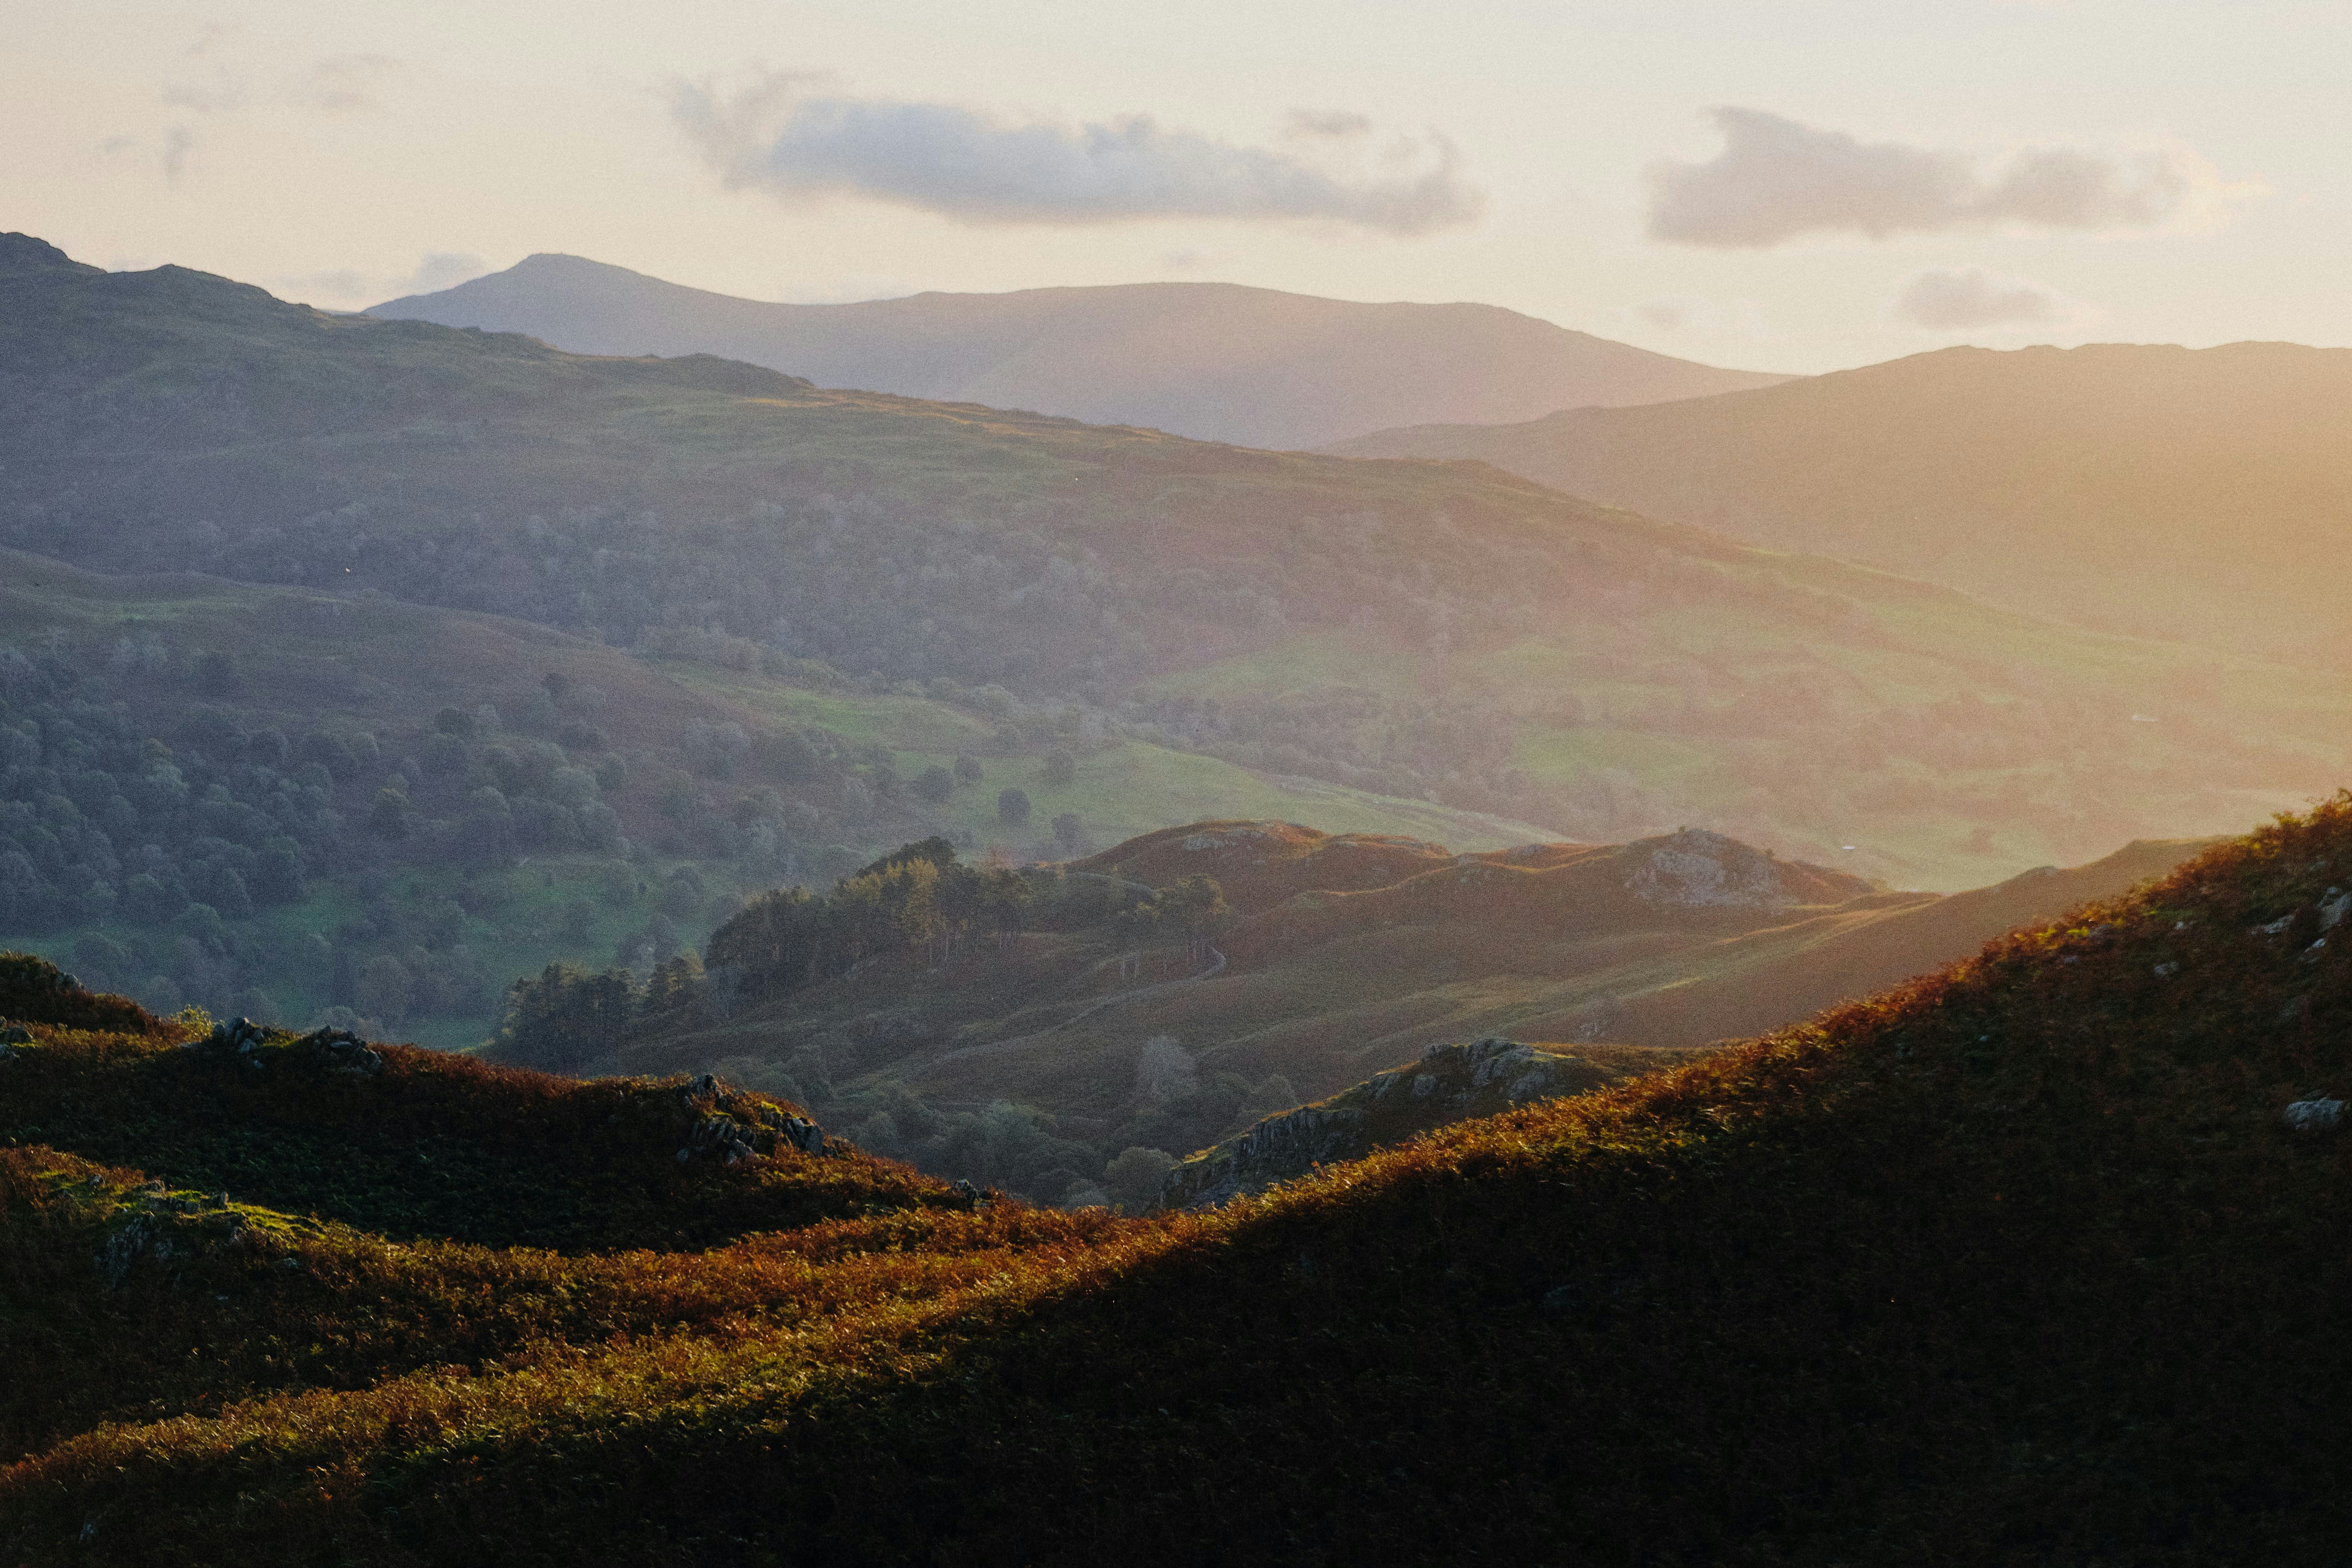 I wanted to capture the criss-crossing and layering of the land as the sun rose over the fells.